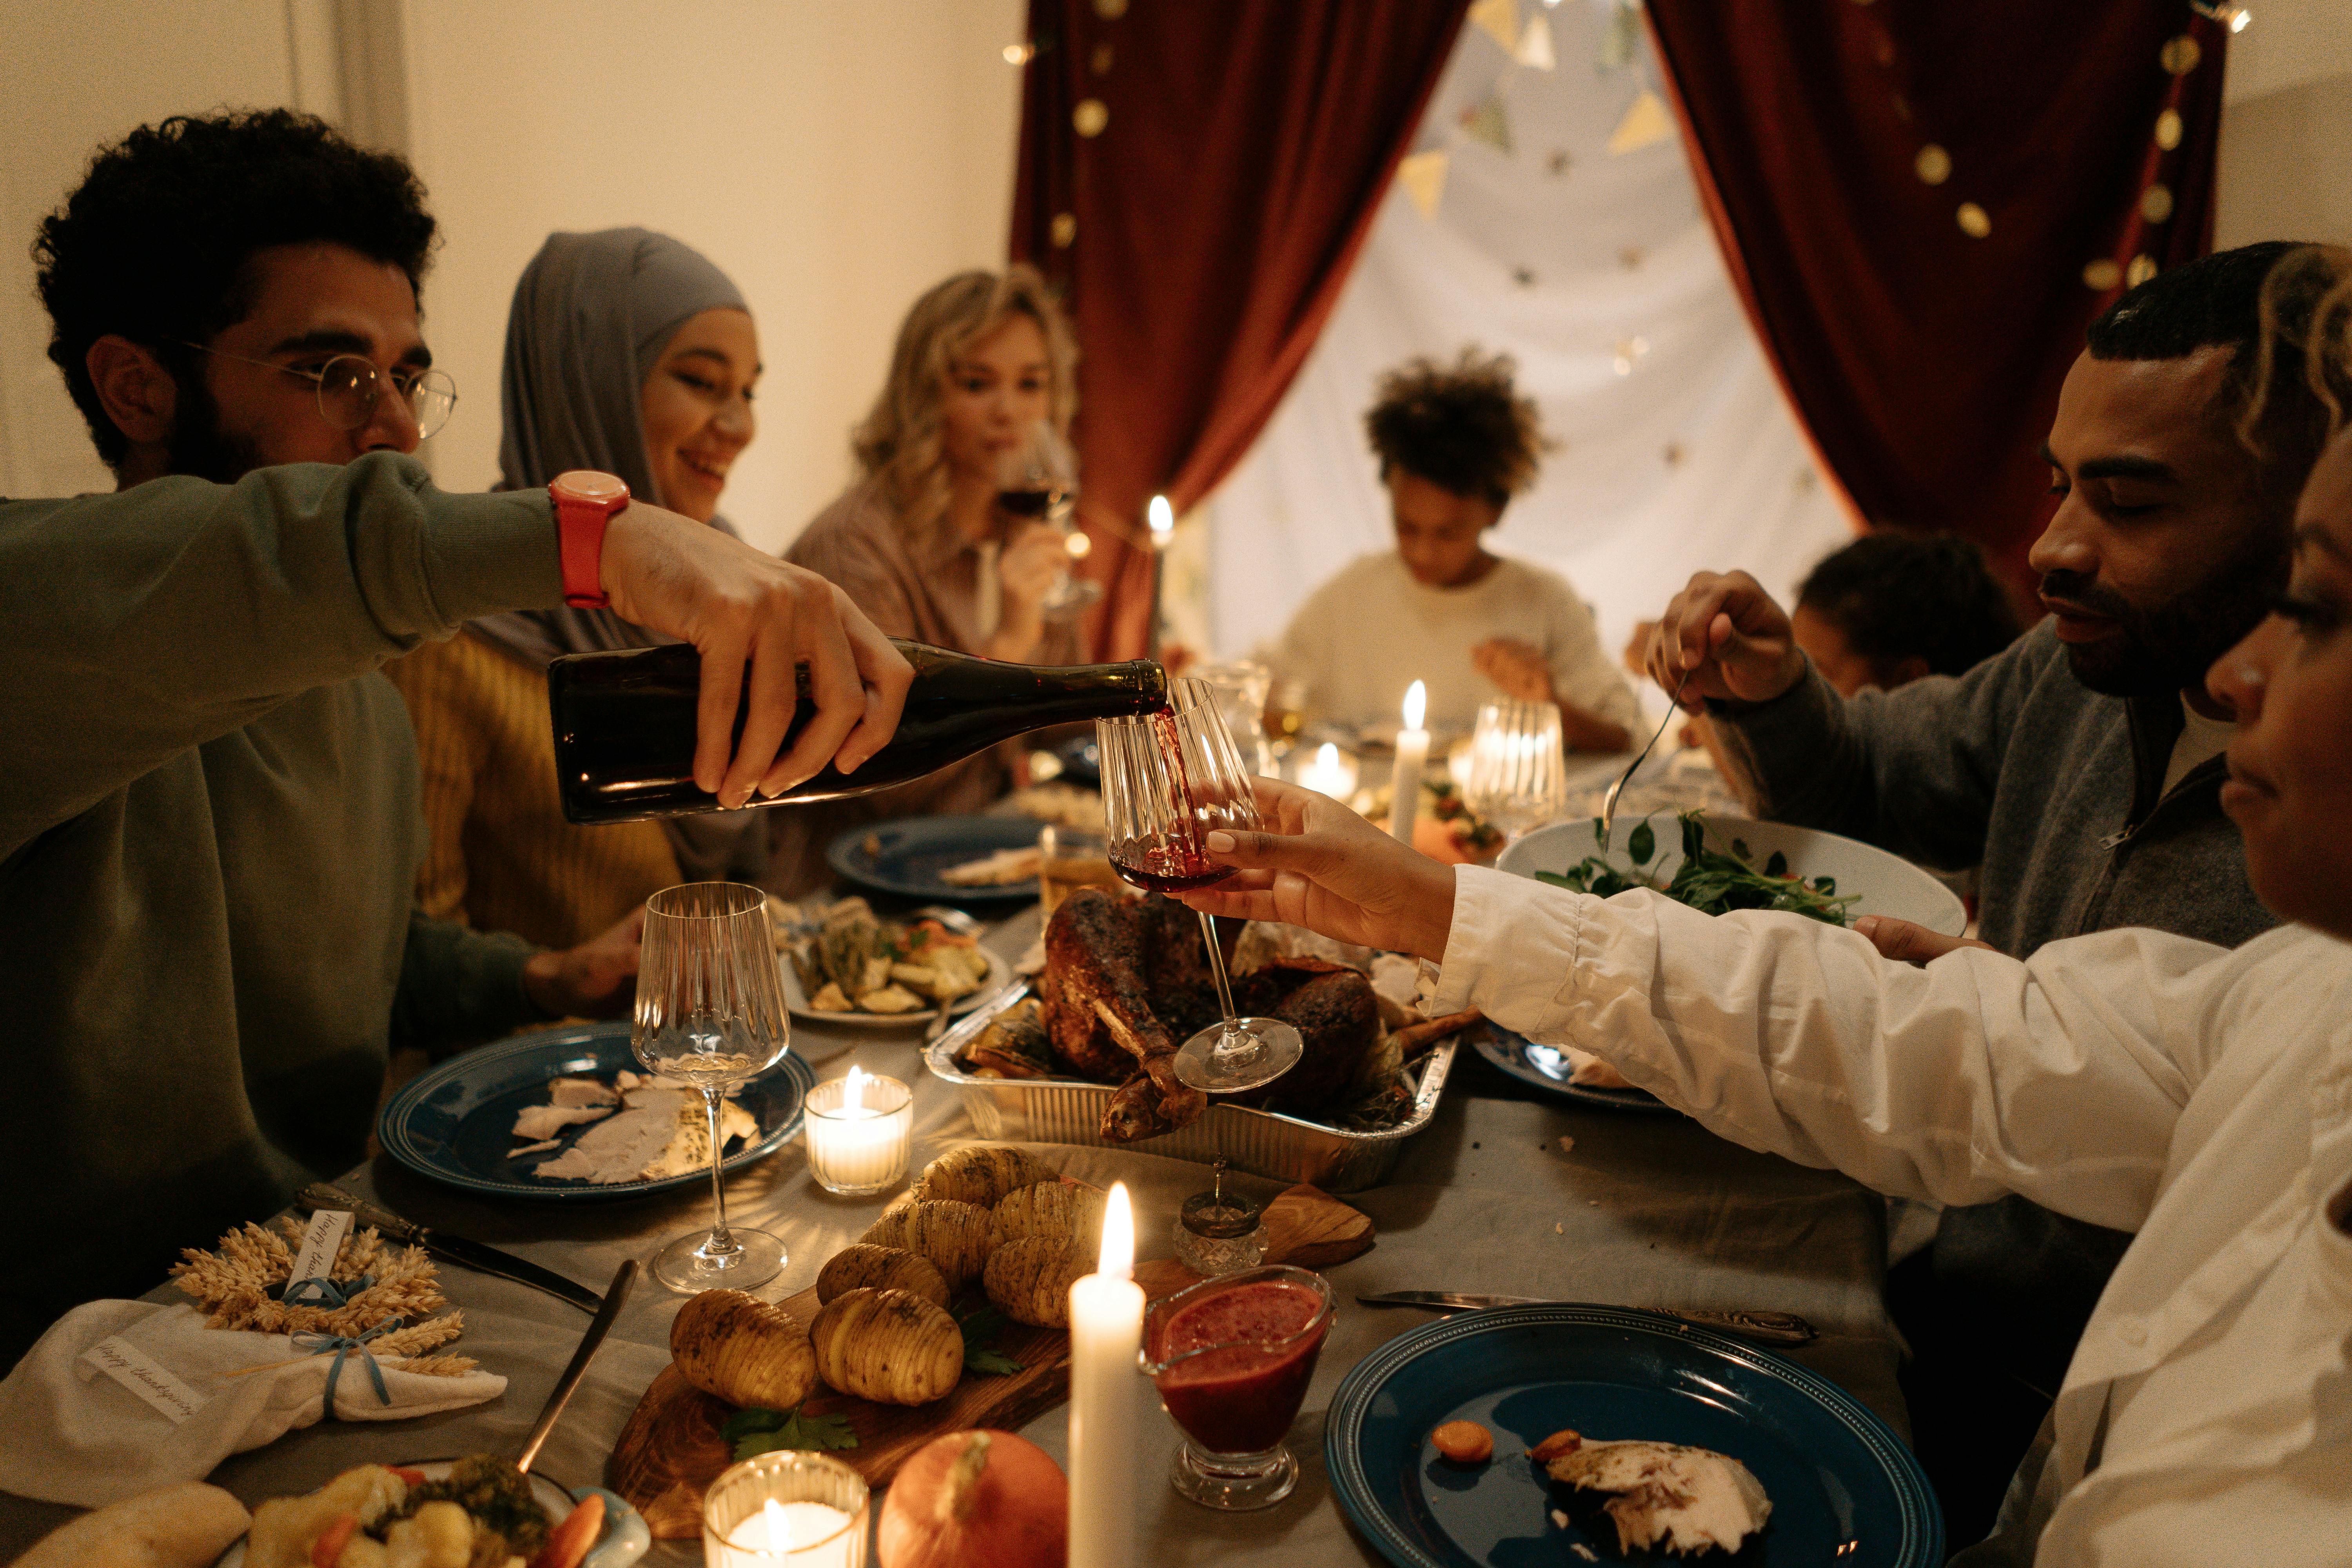 Family seated around a table | Source: Pexels